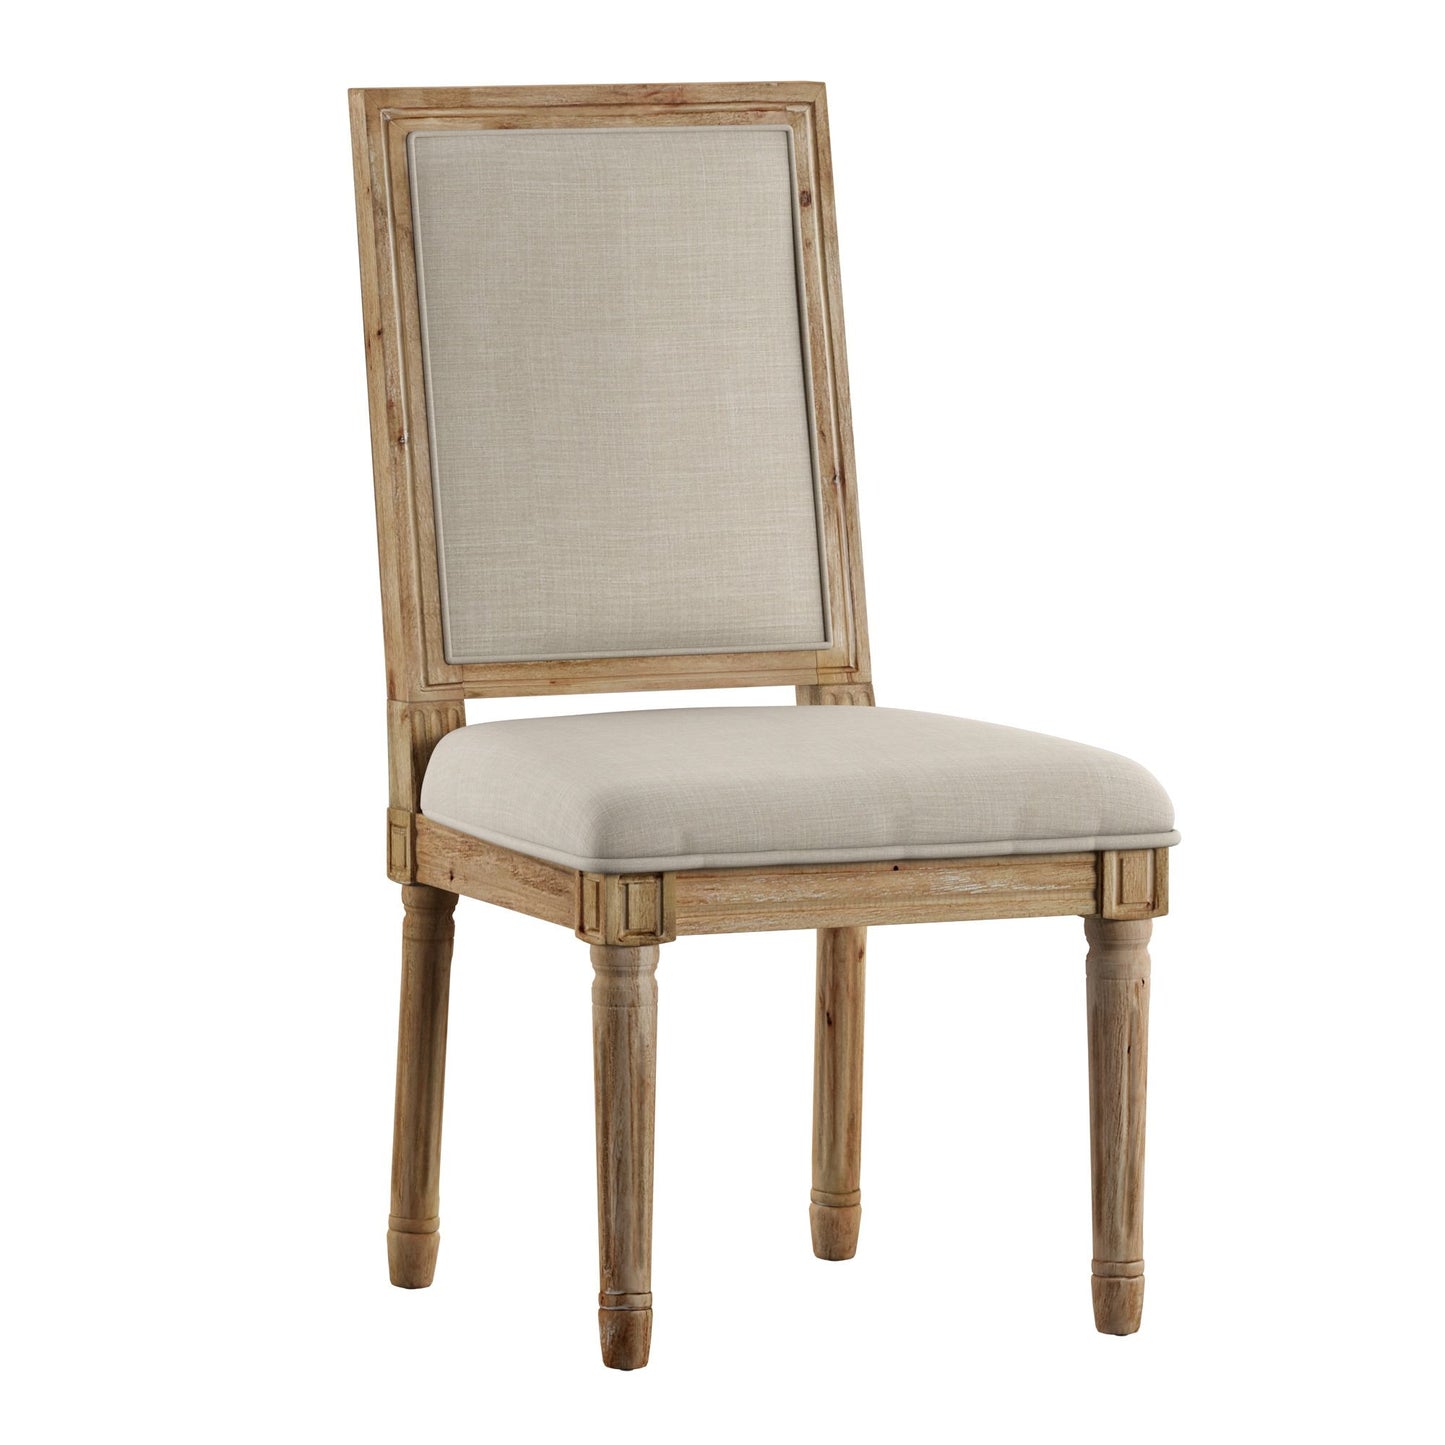 Rectangular Linen and Wood Dining Chairs (Set of 2) - Beige Linen, Natural Finish